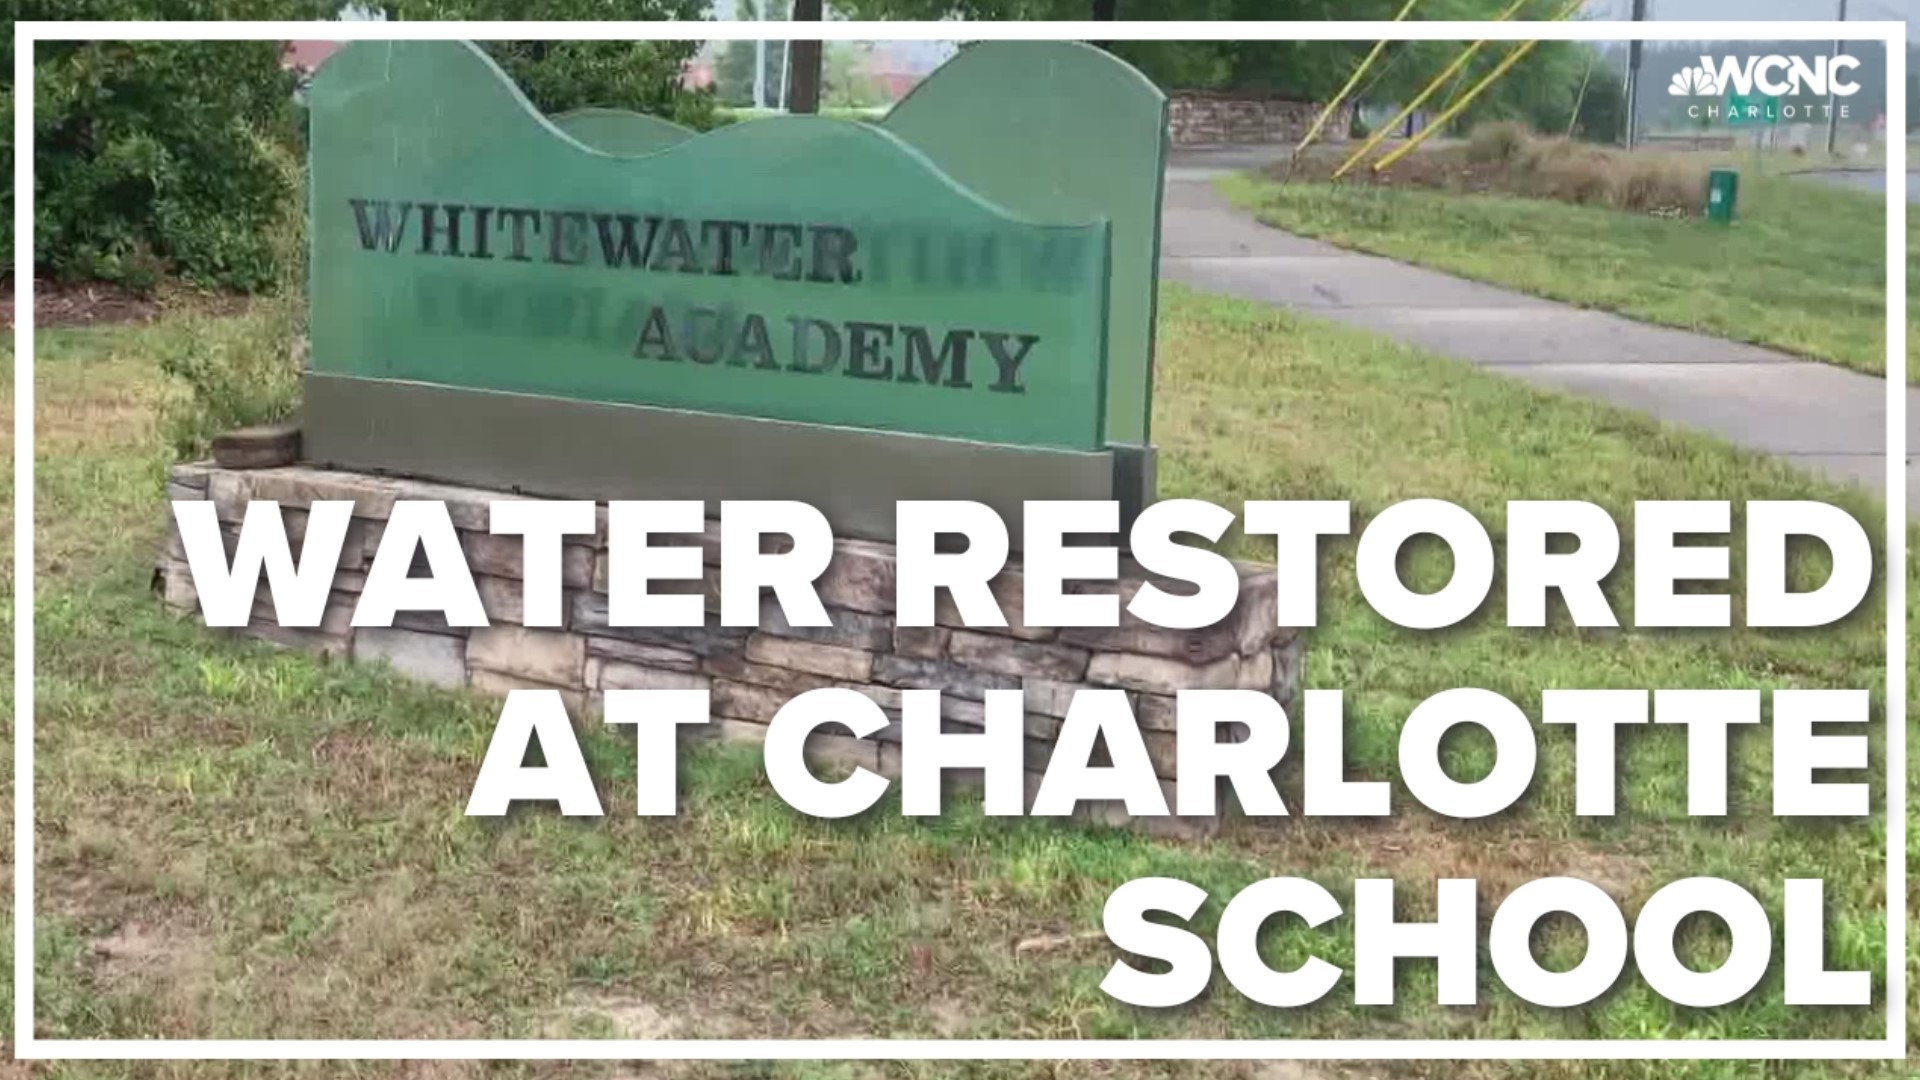 The CMS campus was left without running water for reportedly two days.